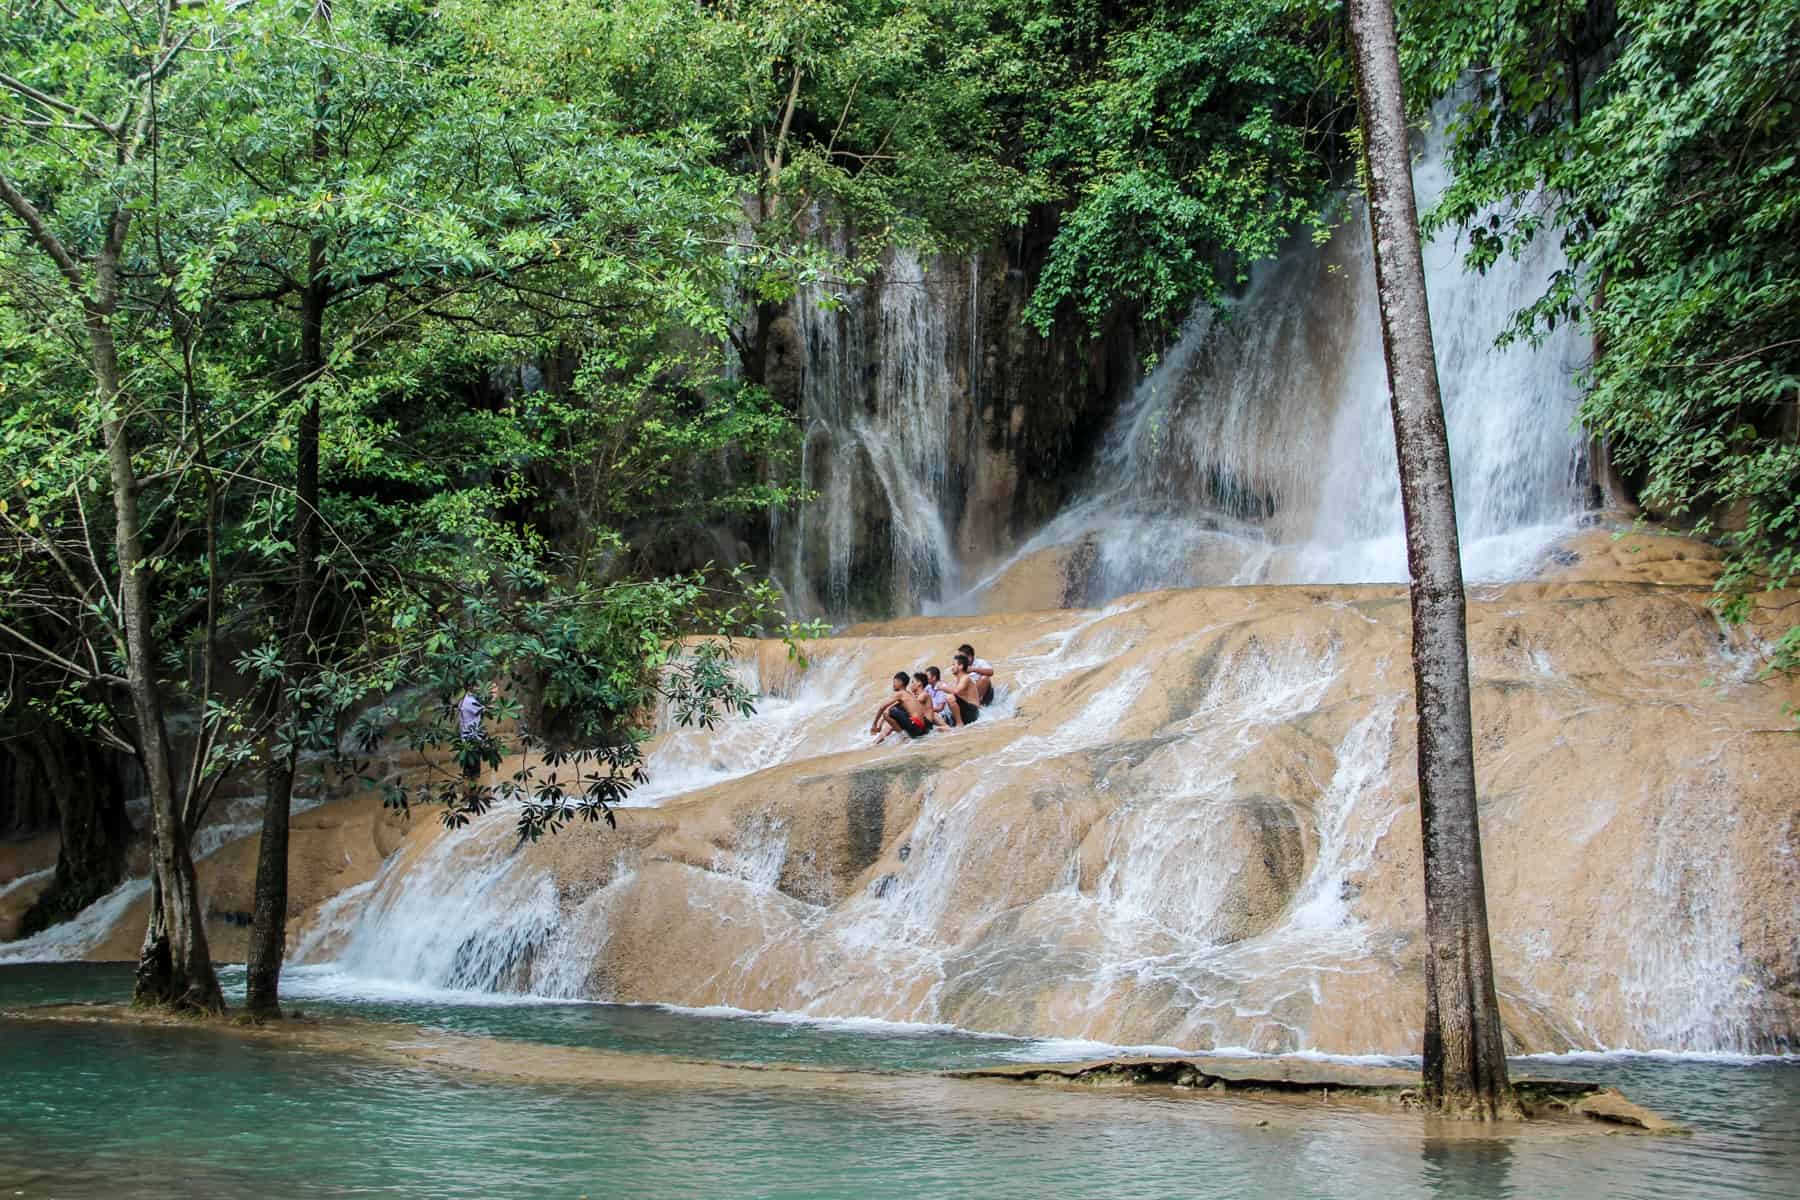 A group of young Thai men sit on a golden limestone rock mound in front of a large waterfall that flows from the forest above